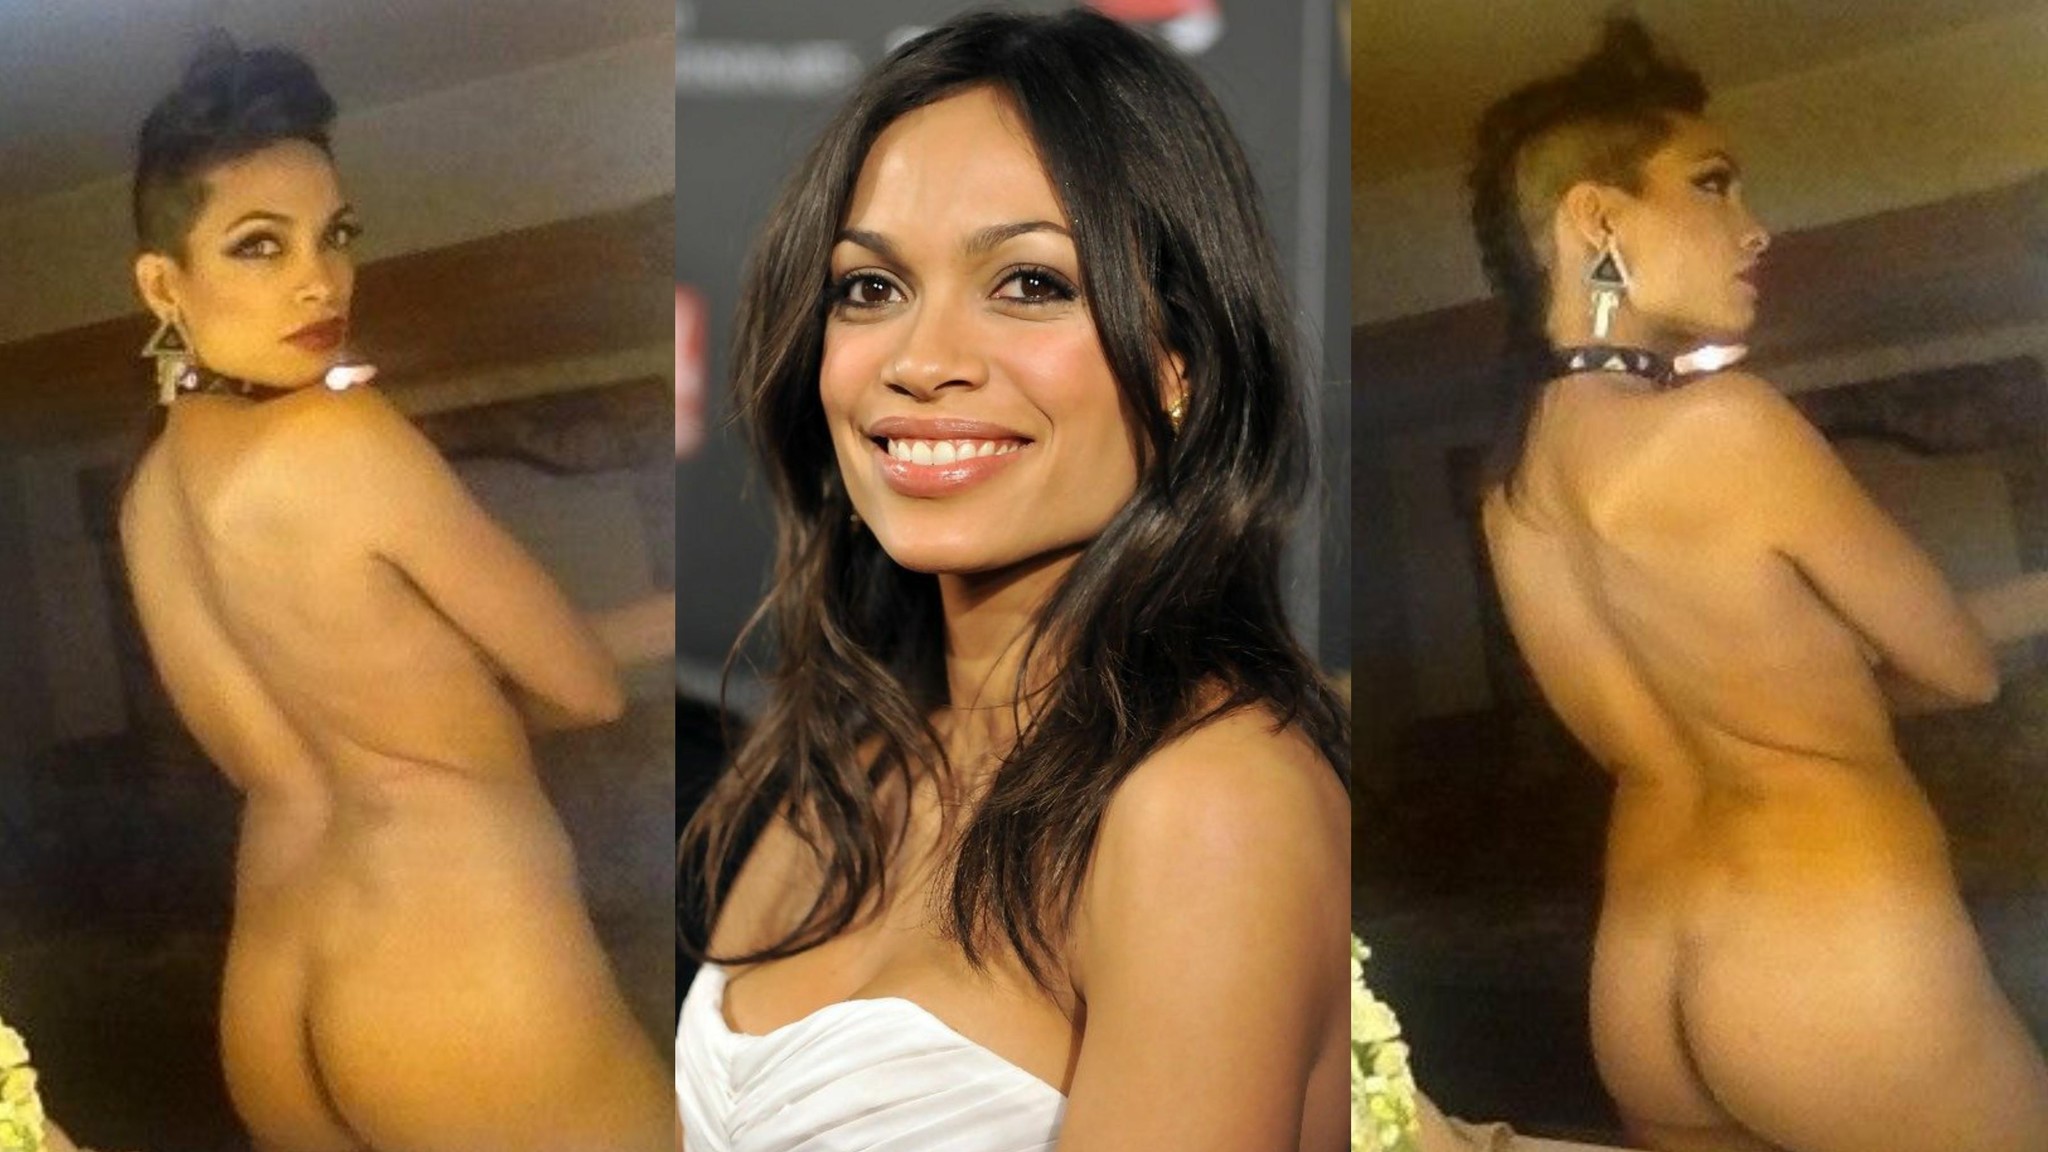 Gorgeous Rosario Dawson in all her glory - NSFW, Celebrities, Actors and actresses, Rosario Dawson, Female, Naked, Boobs, Nudity, beauty, GIF, Longpost, Women